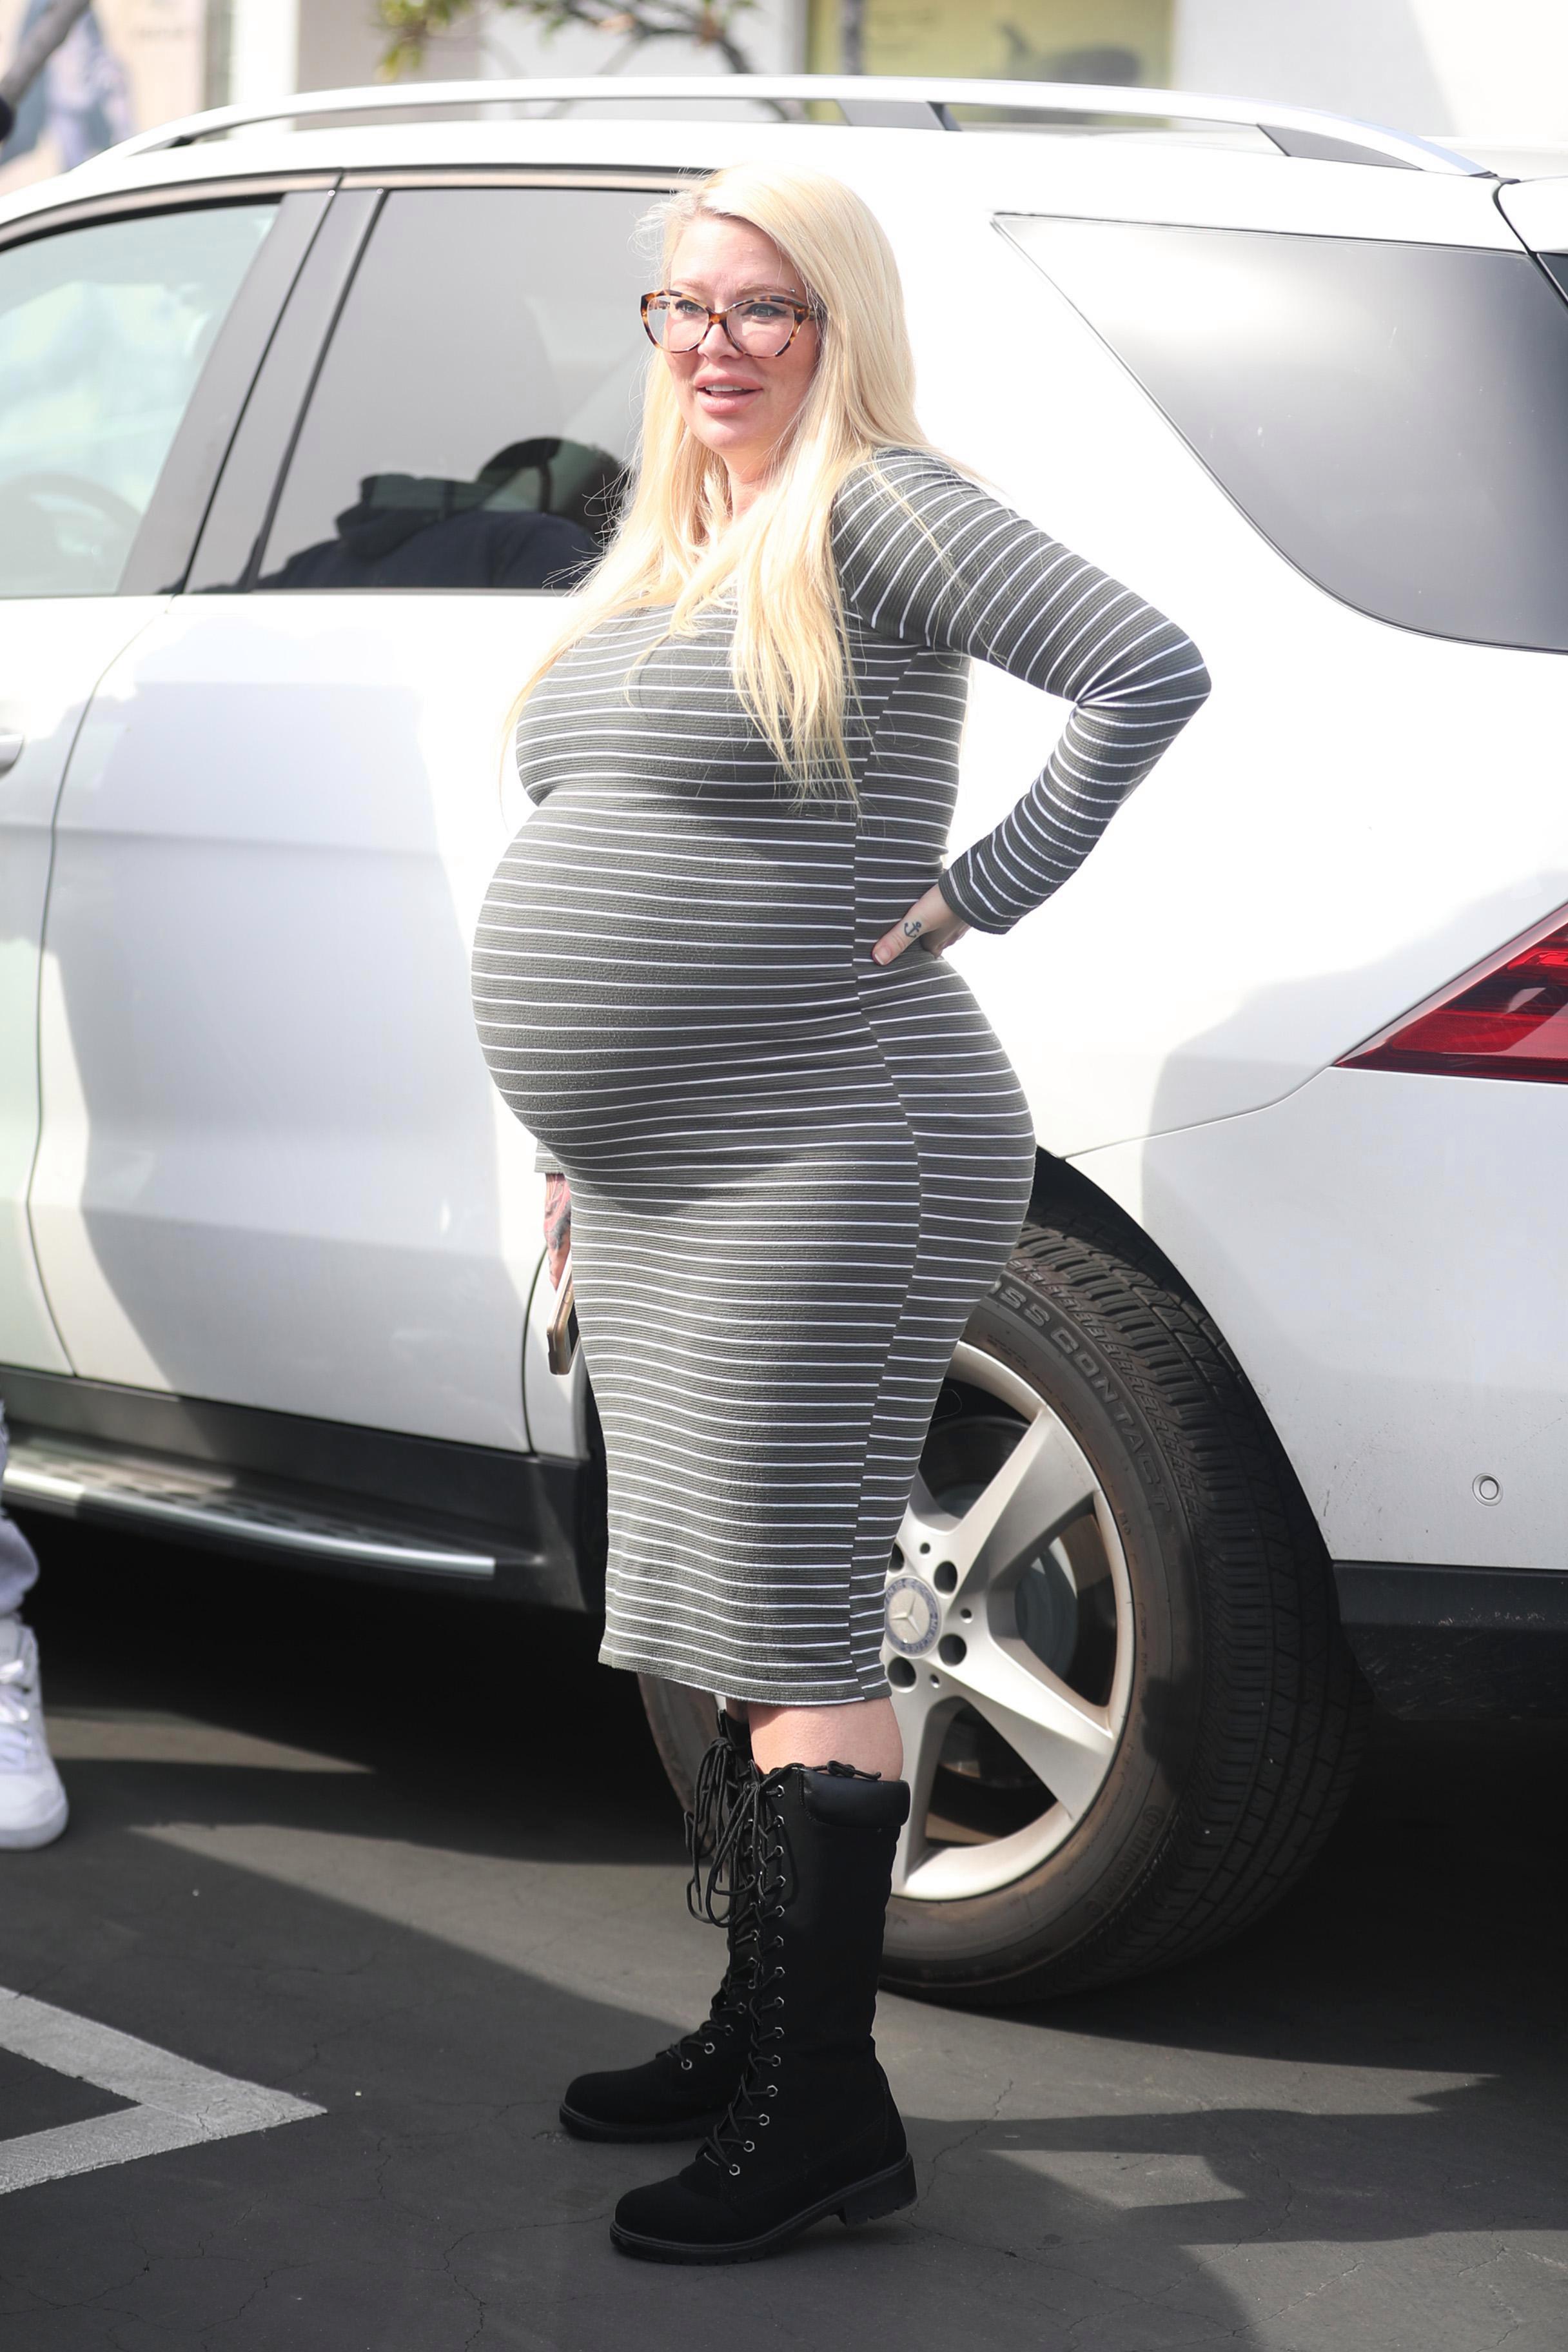 Heavily Pregnant Jenna Has Two Kids From A Previous Relationship